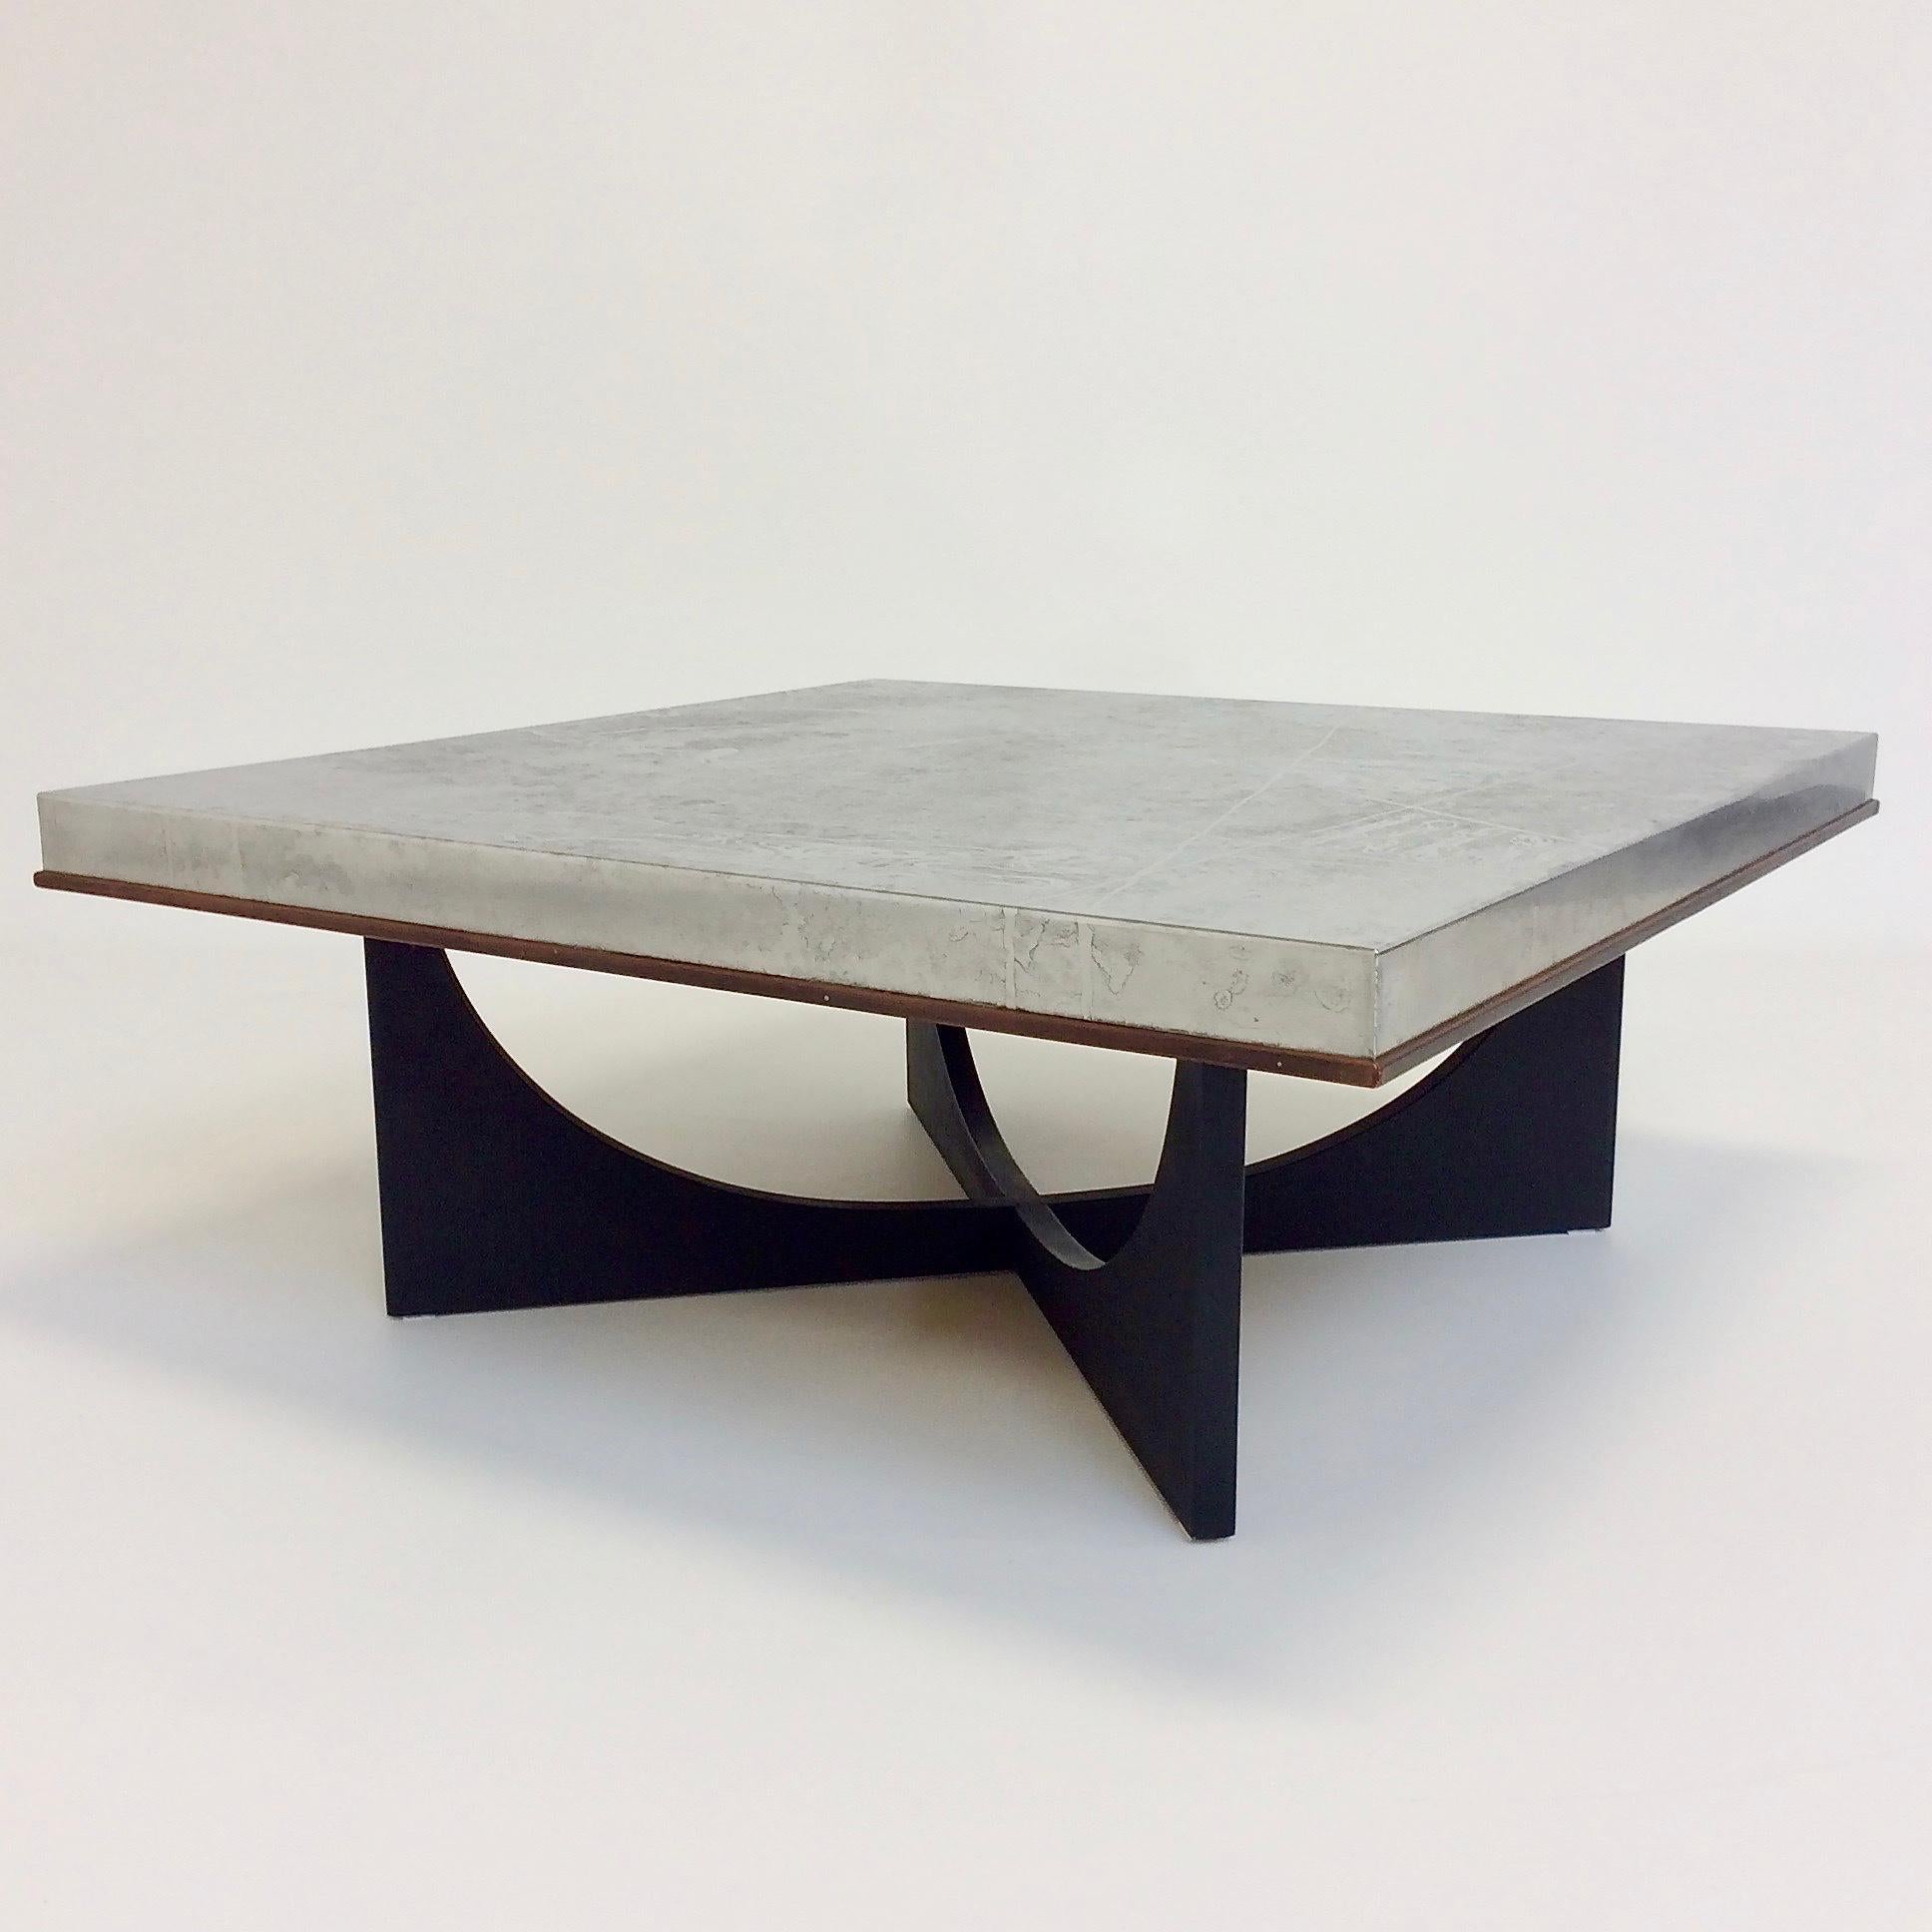 Nice coffee table by Heinz Lilienthal, circa 1970, Germany.
Etched metal, wood frame, black painted wood base.
Dimensions: 111 cm W, 111 cm D, 45 cm H.
Good original condition.
All purchases are covered by our Buyer Protection Guarantee.
This item